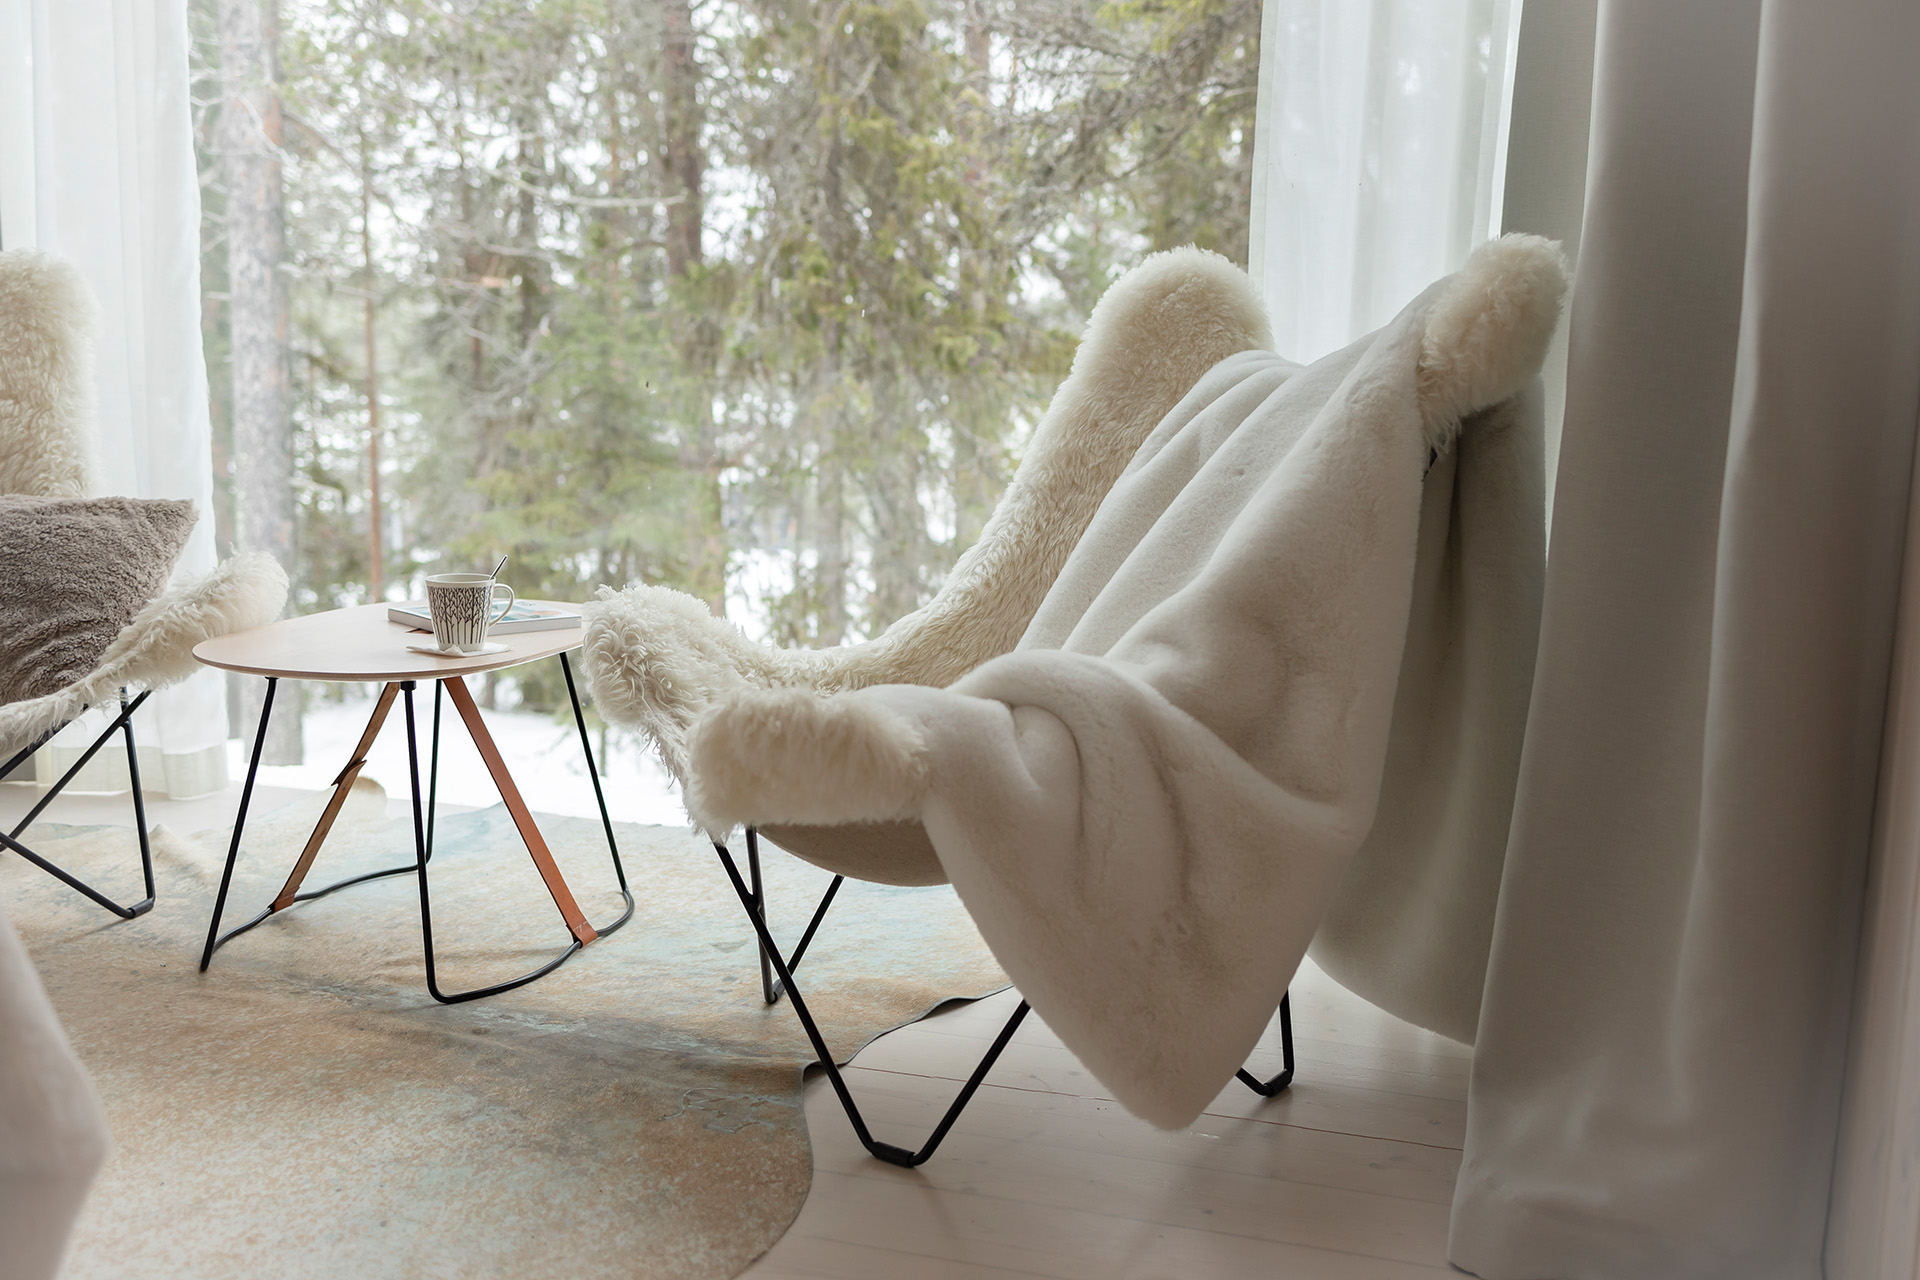 Two armchairs in front of the window in the Arctic TreeHouse Suite's lounge.